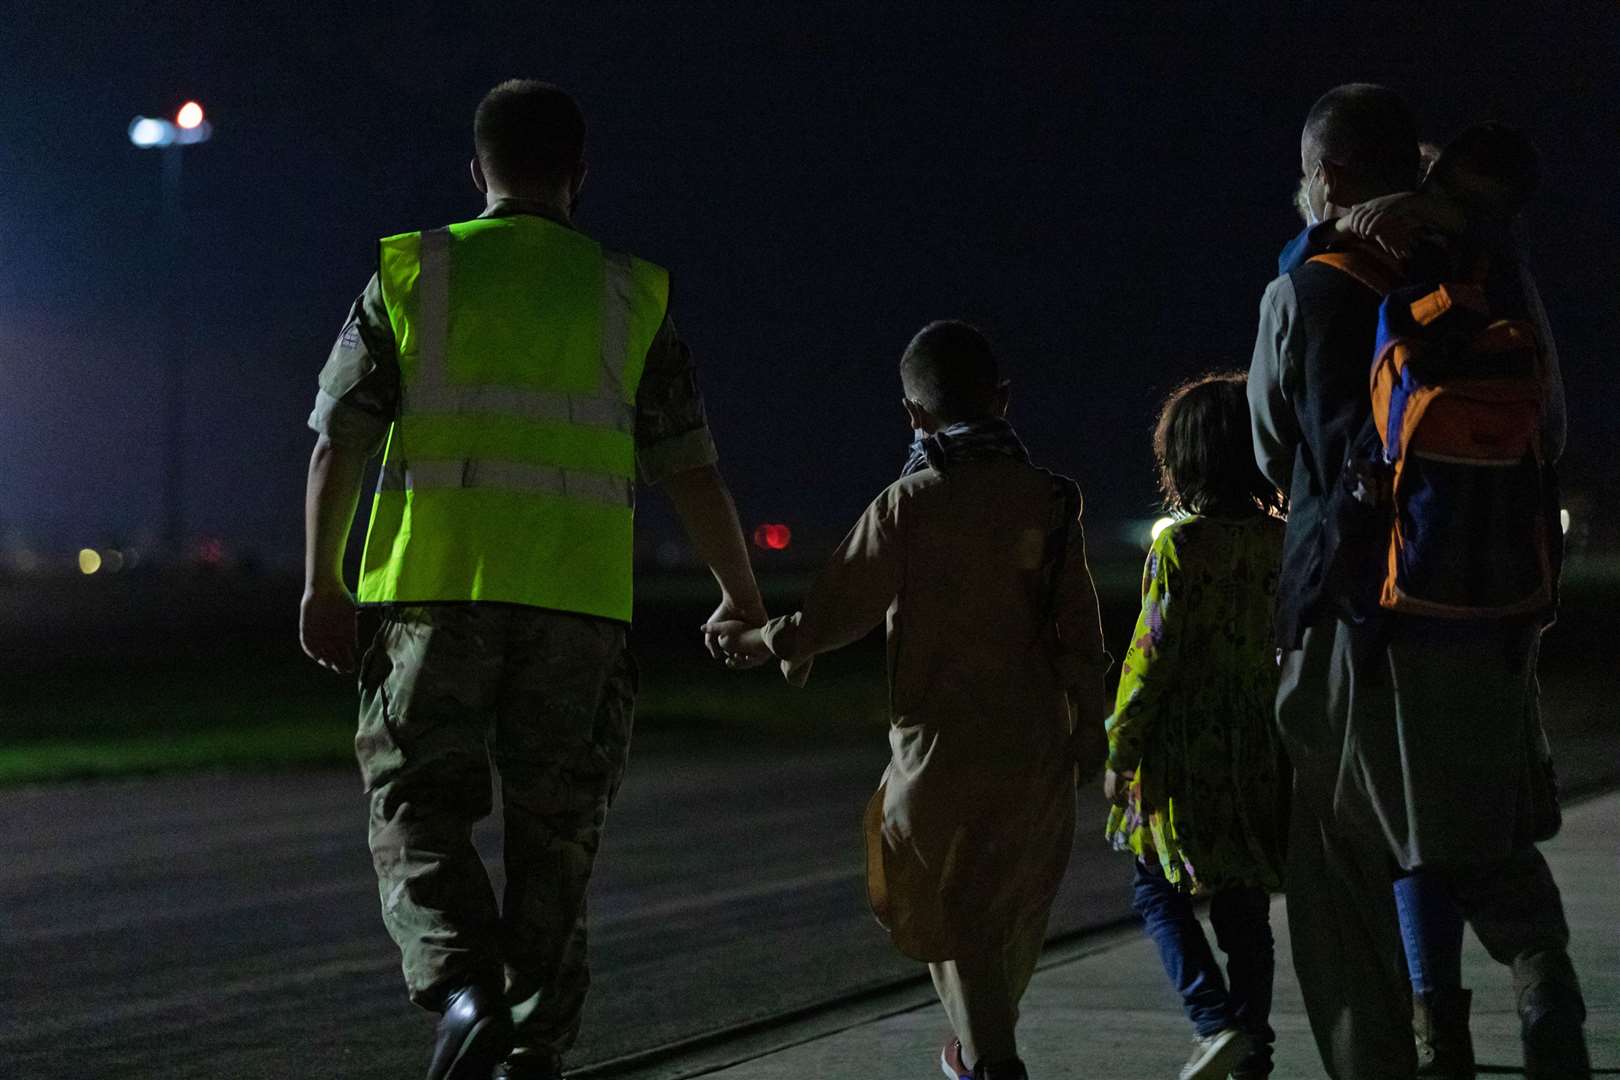 Arrivals at RAF Brize Norton who have been evacuated from Afghanistan (Cpl Will Drummee RAF/MOD/Crown copyright)